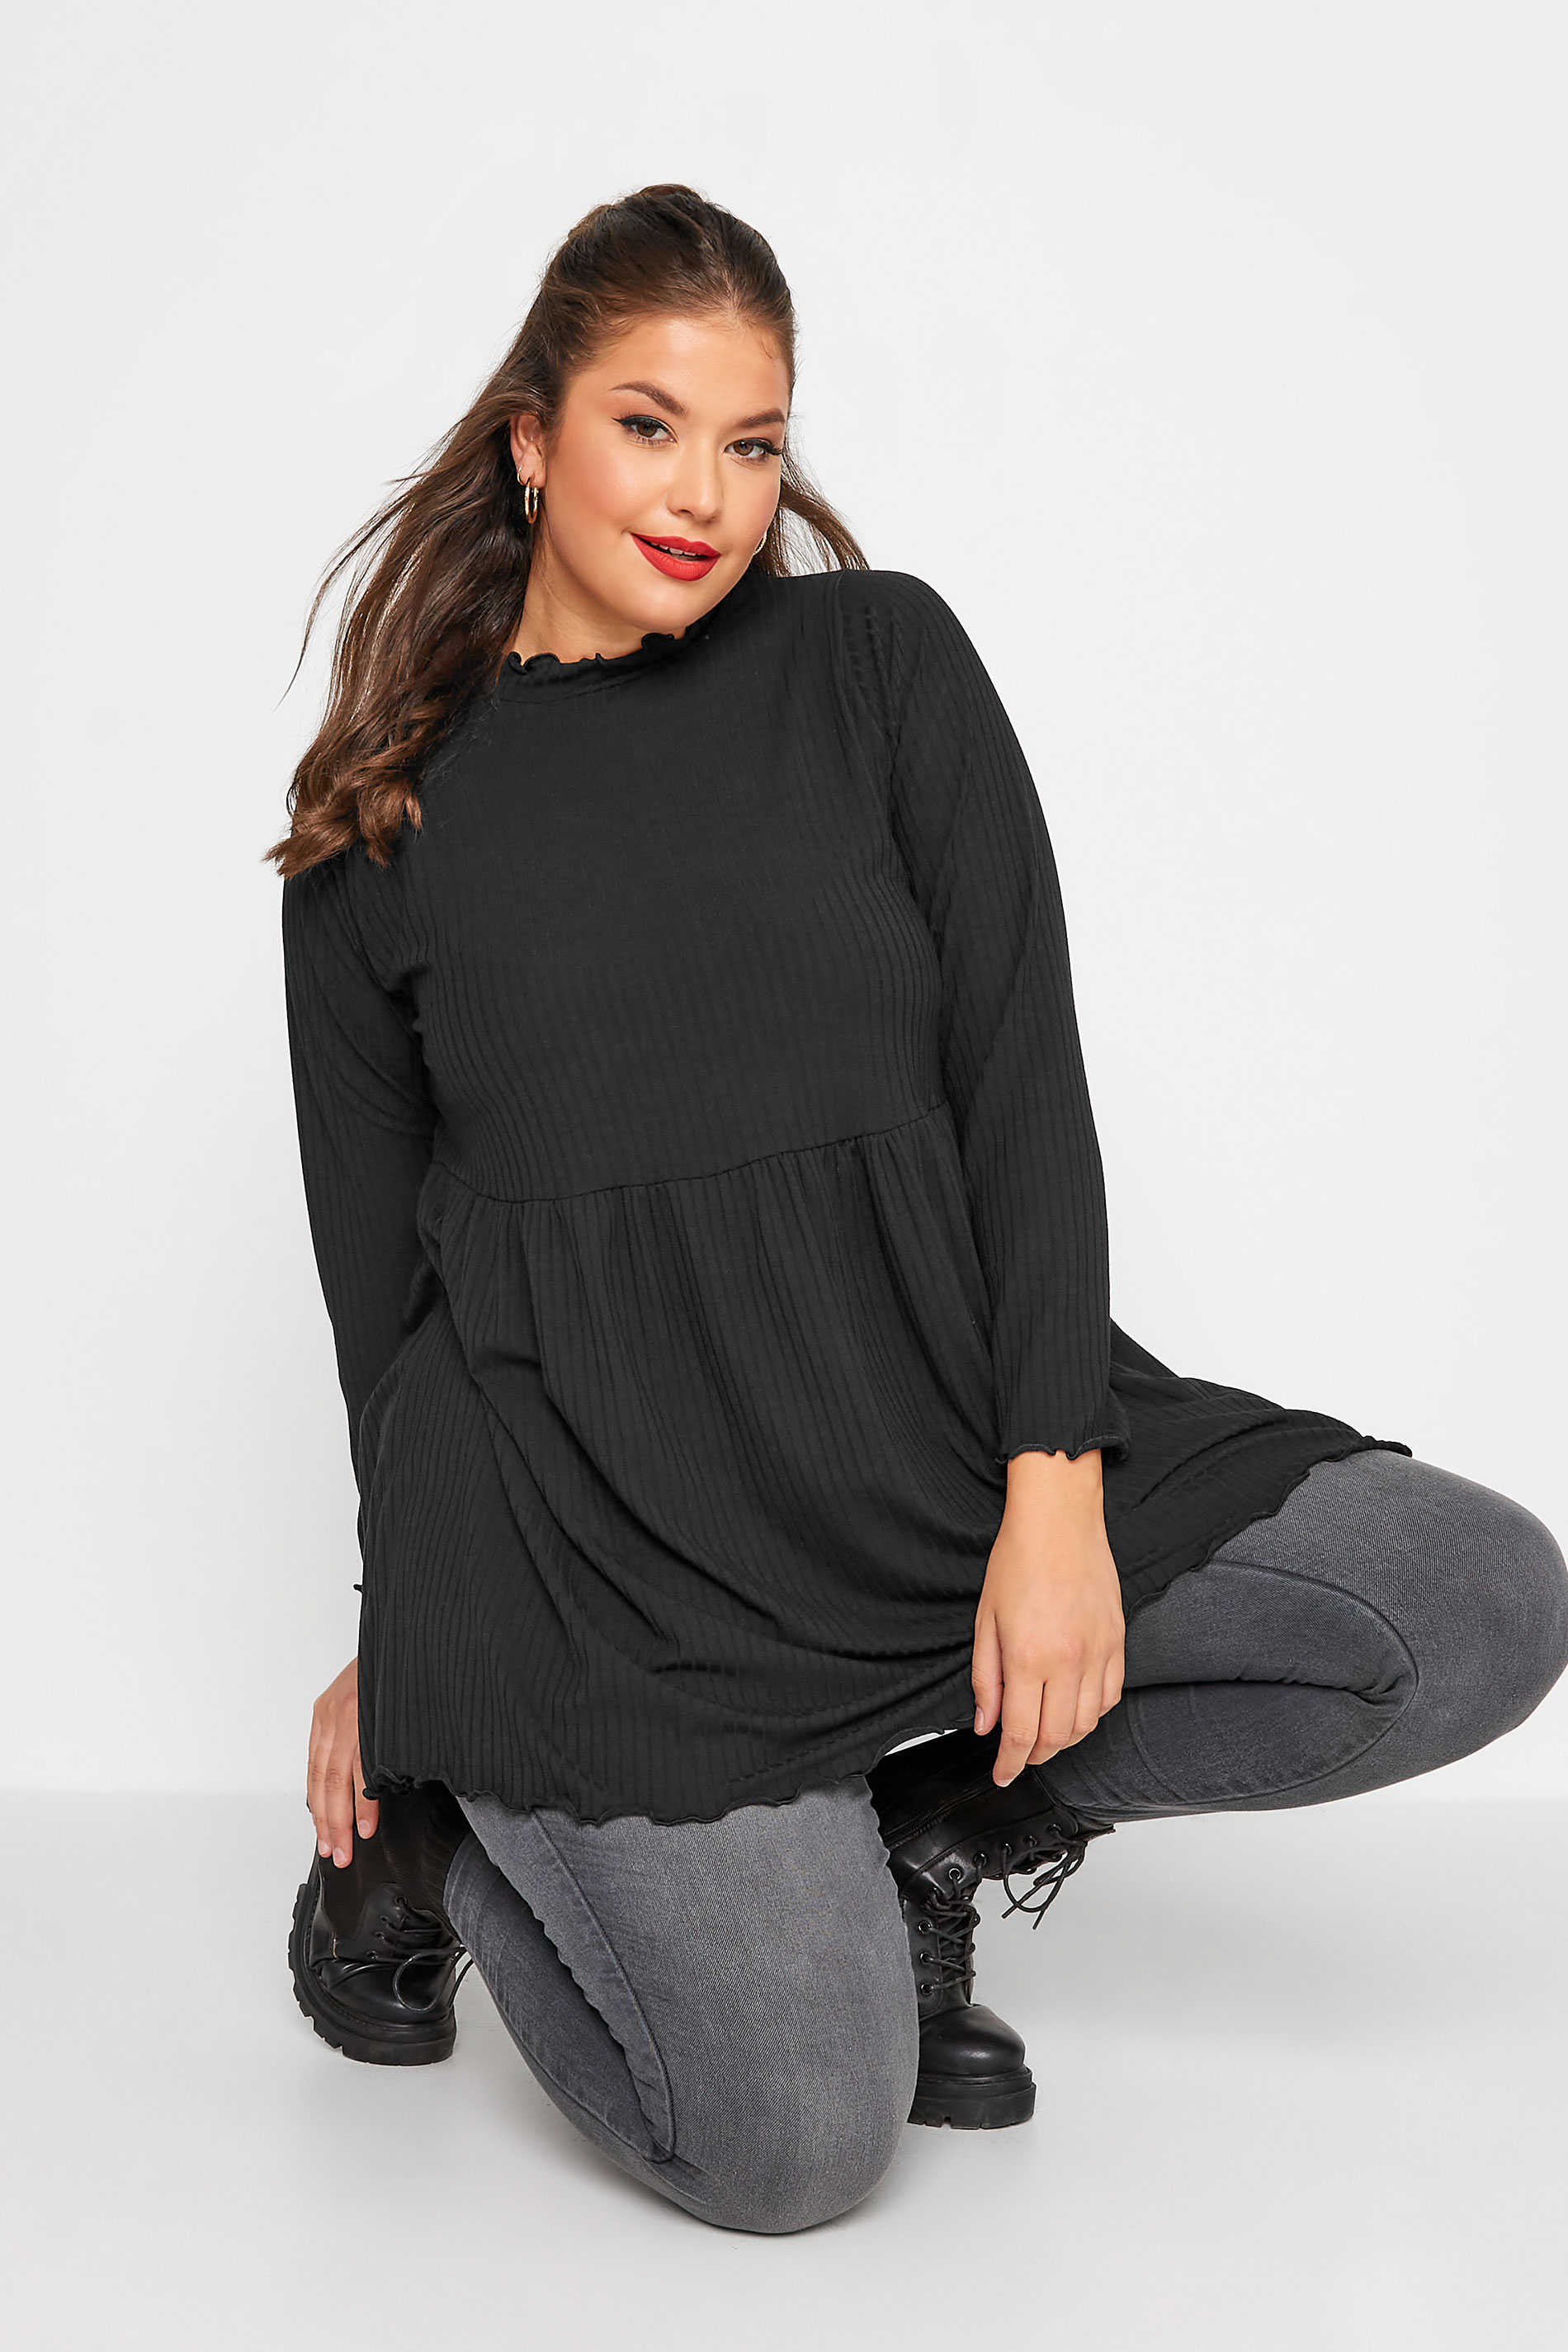 LIMITED COLLECTION Plus Size Black Peplum Lettuce Hem Top | Yours Clothing  1